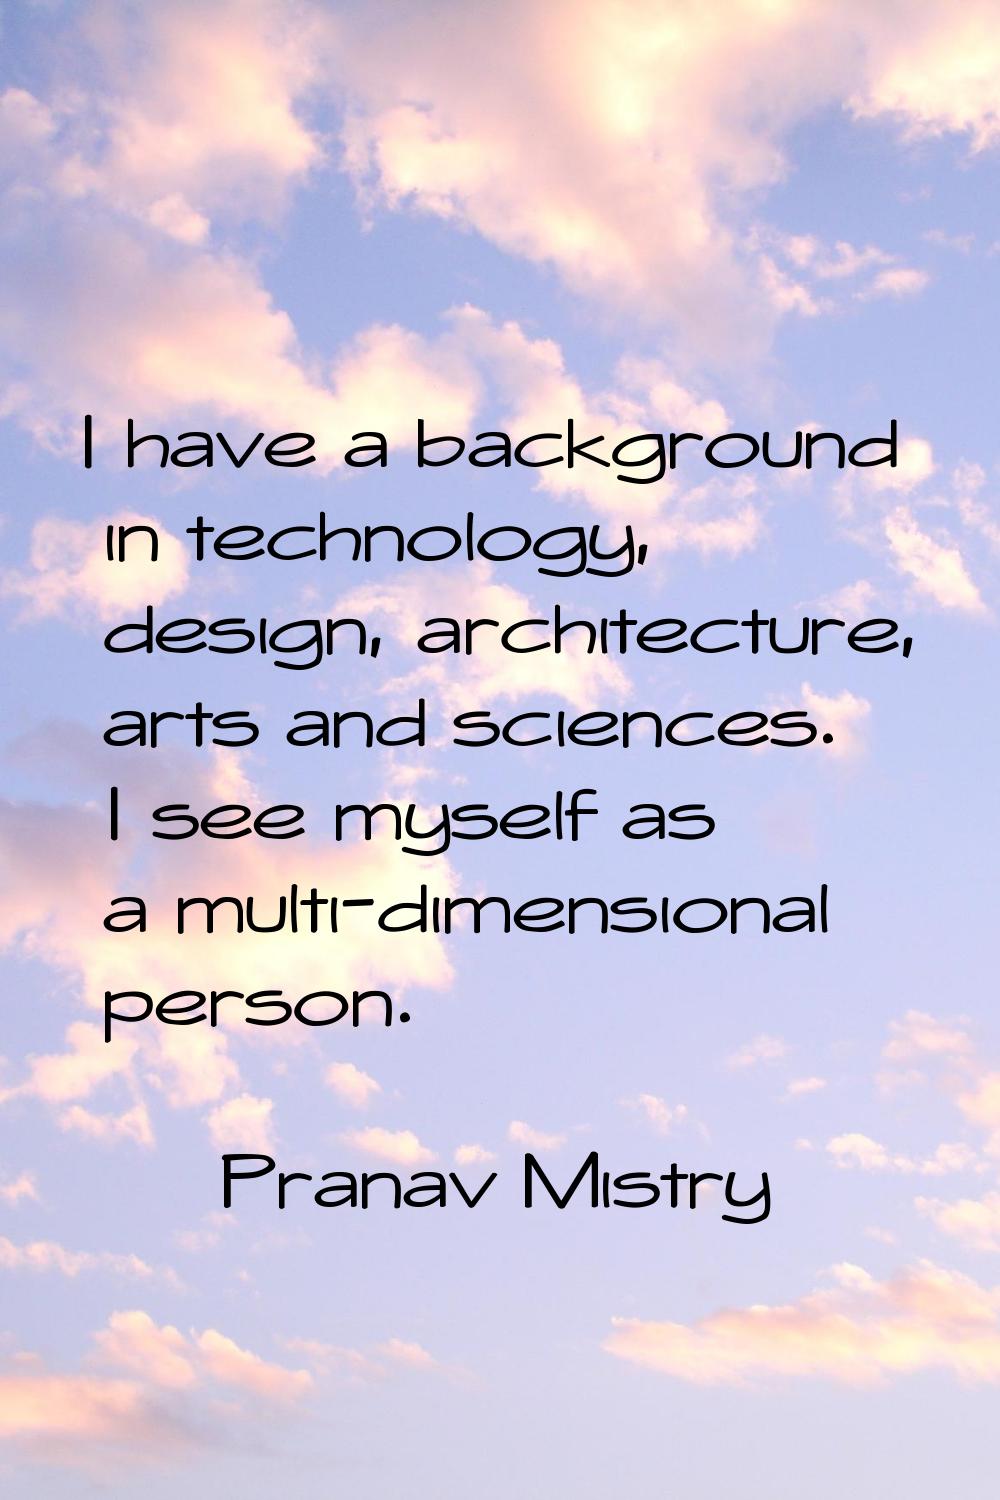 I have a background in technology, design, architecture, arts and sciences. I see myself as a multi